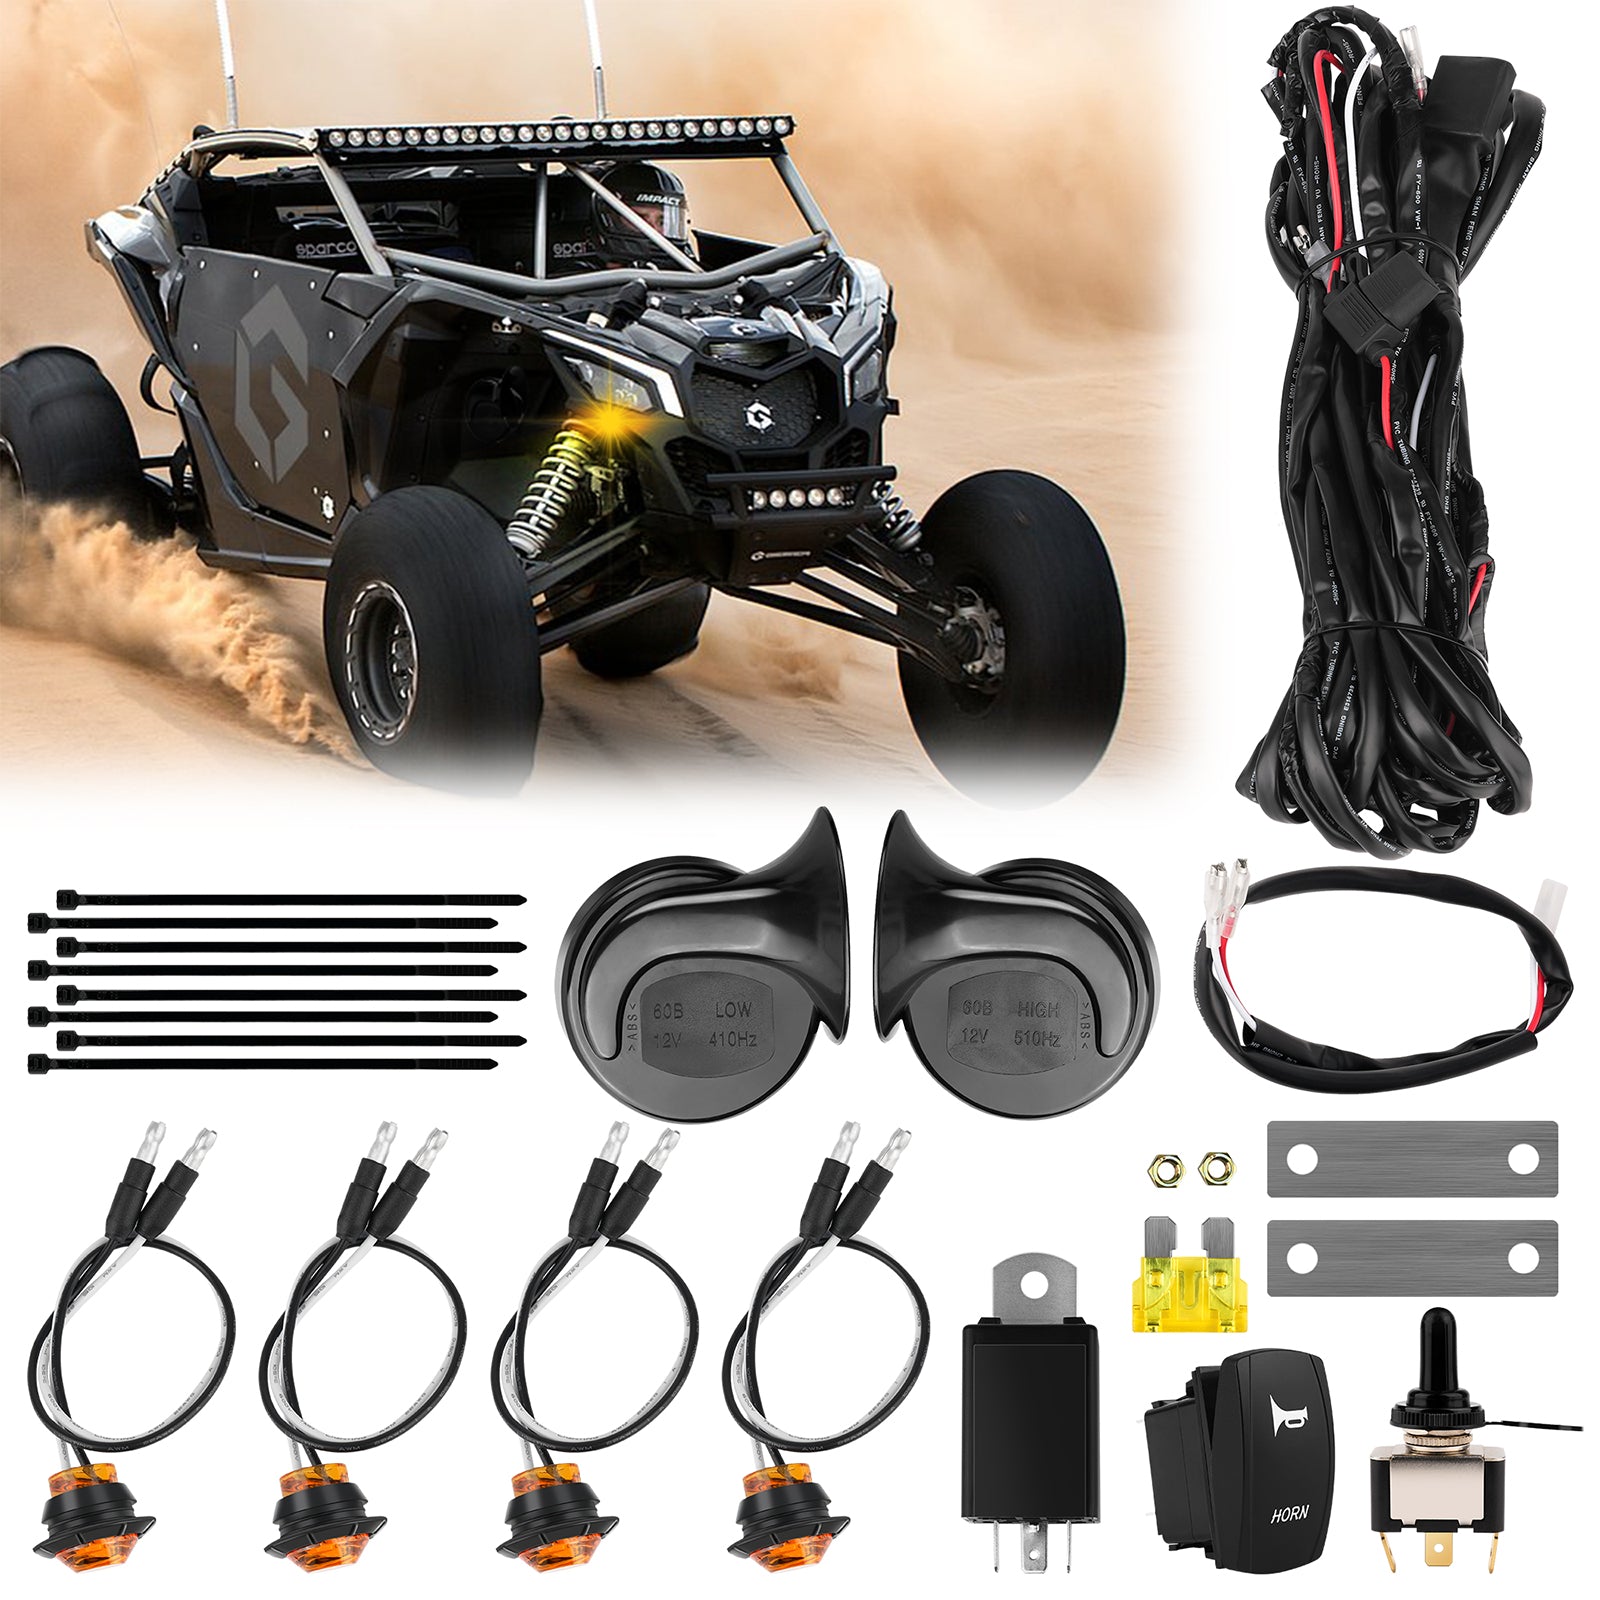 UTV/ATV Turn Signal Horn Kit, Amber Light Universal Street Legal With Toggle Switch Relay Wire Harness Compatible With Pioneer, RZR, Can-Am, Kawasaki